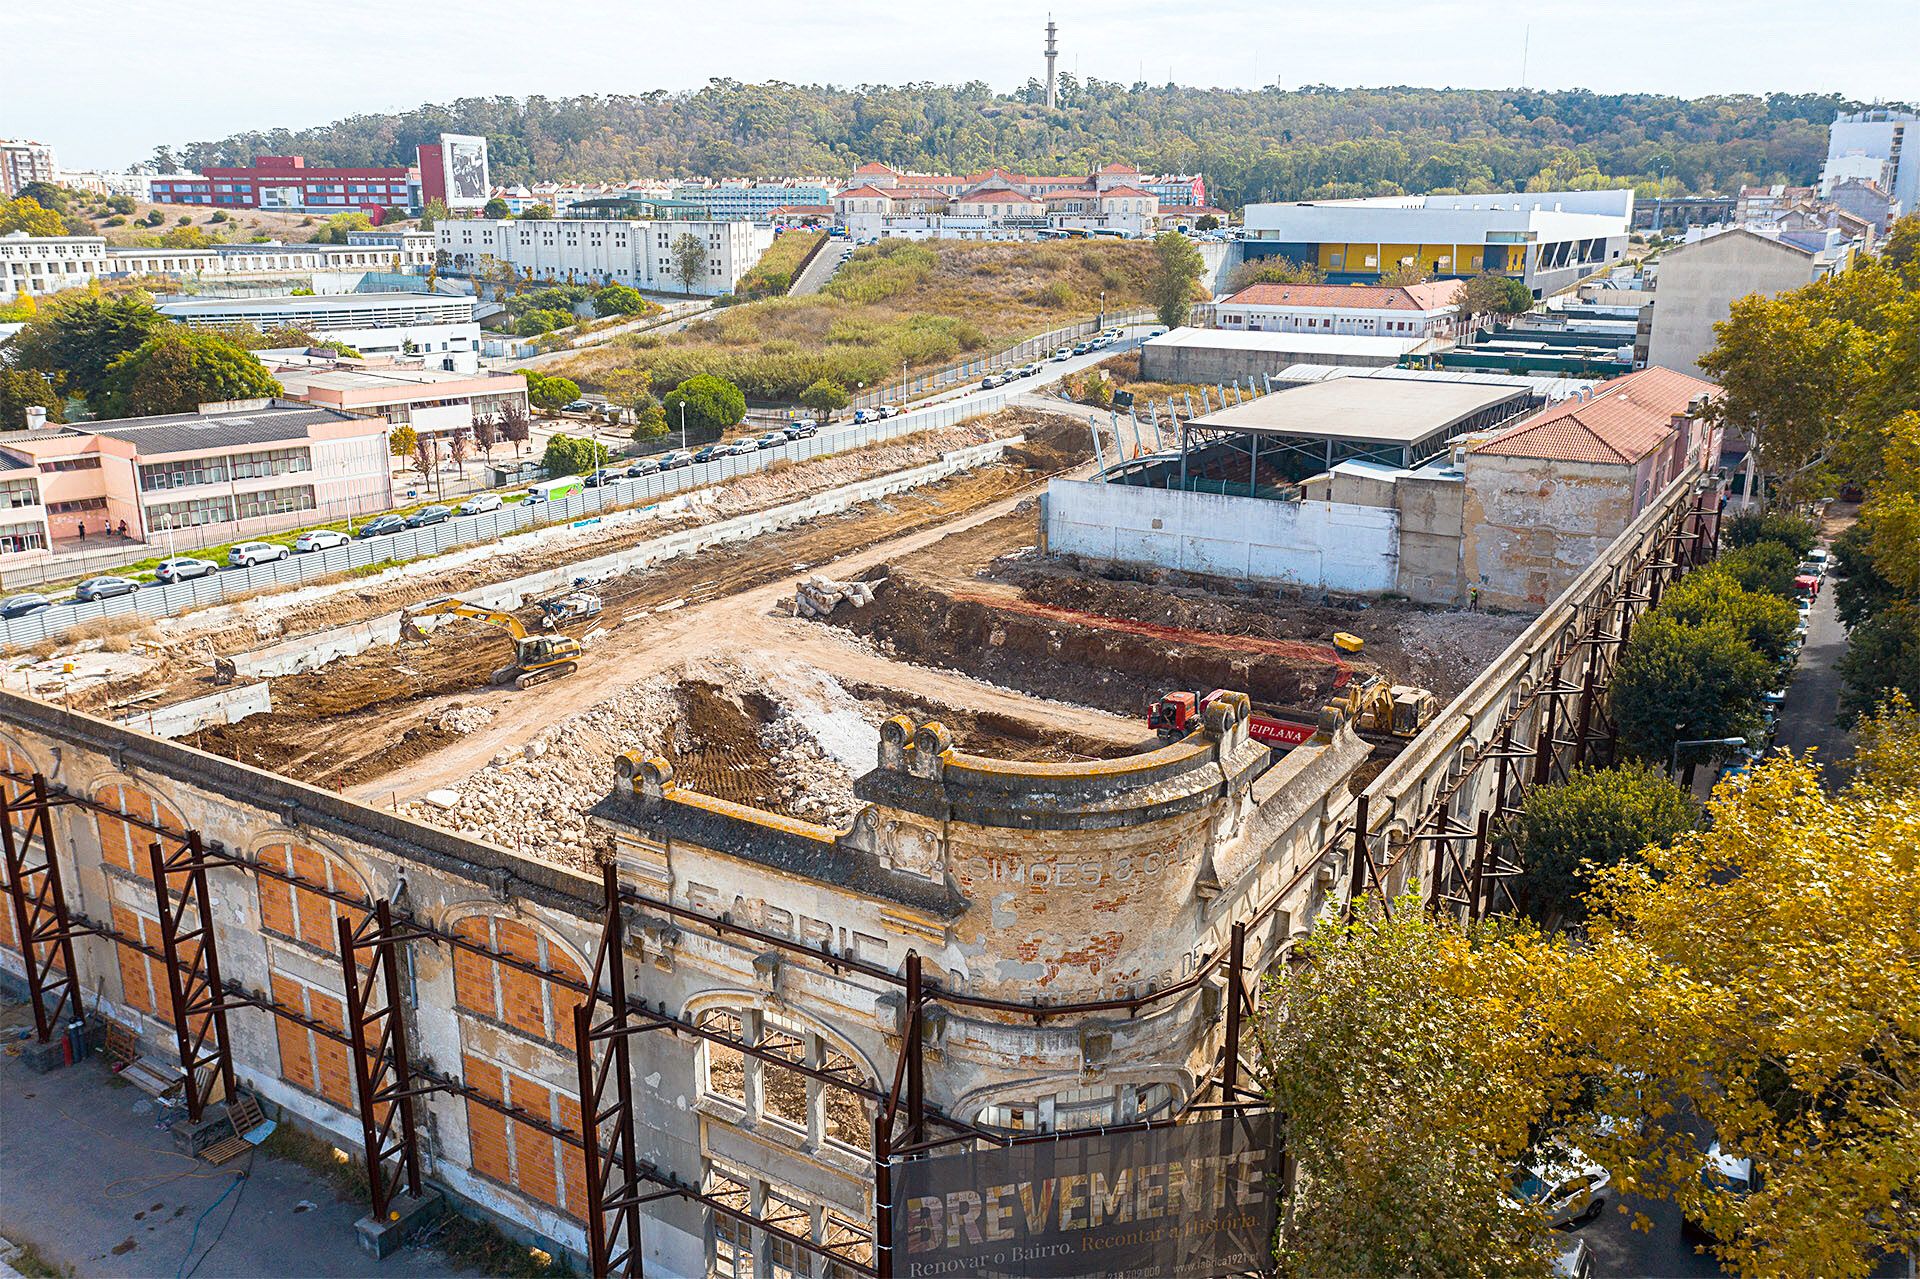 August 2019: Start of the conversion of the Simões & C.ª Factory